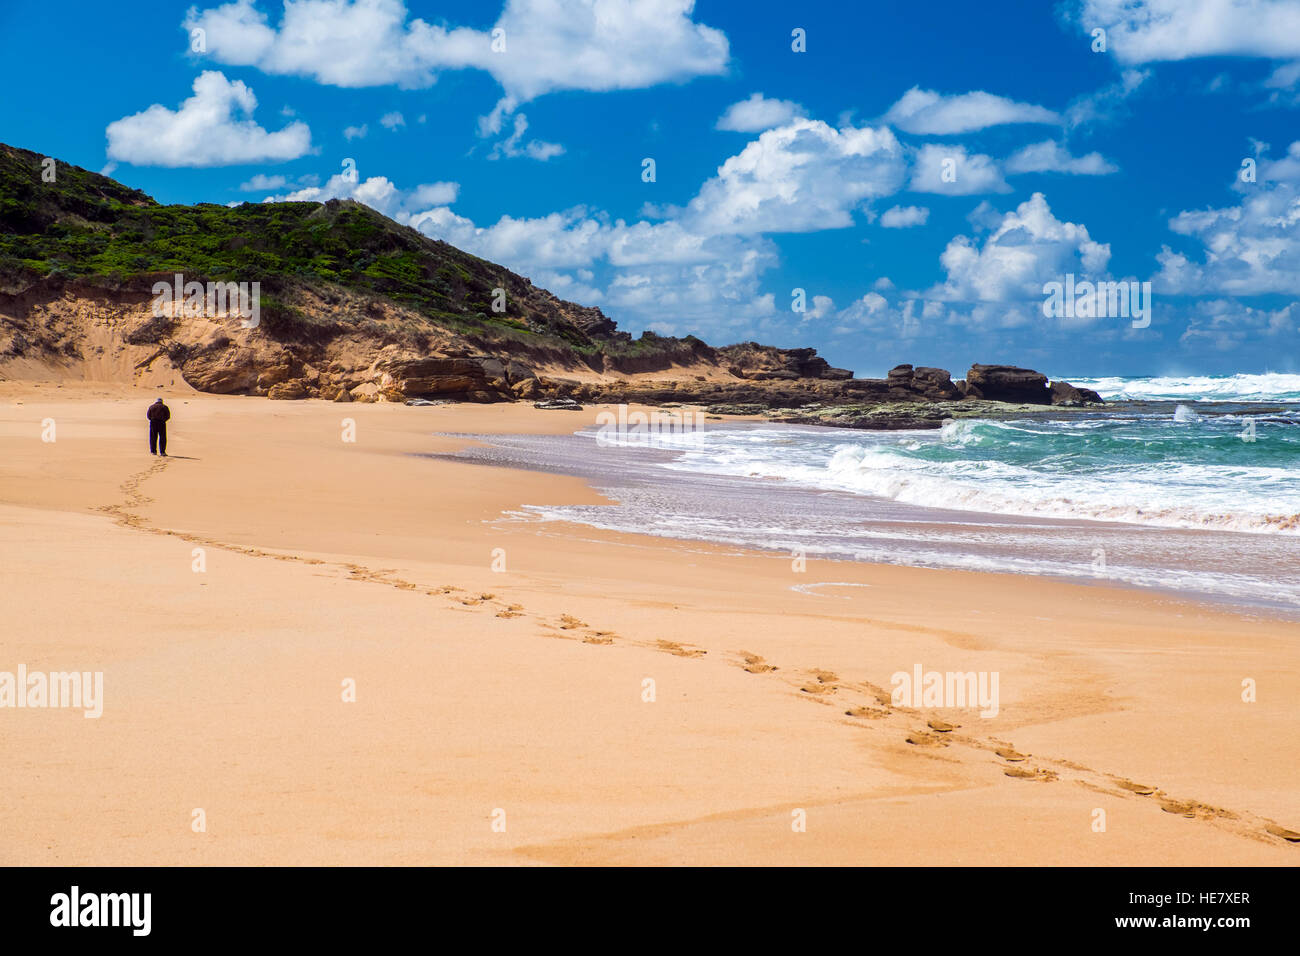 Coastal scenery on The Great Ocean Road in the Australian state of Victoria, with a lone figure on beach Stock Photo